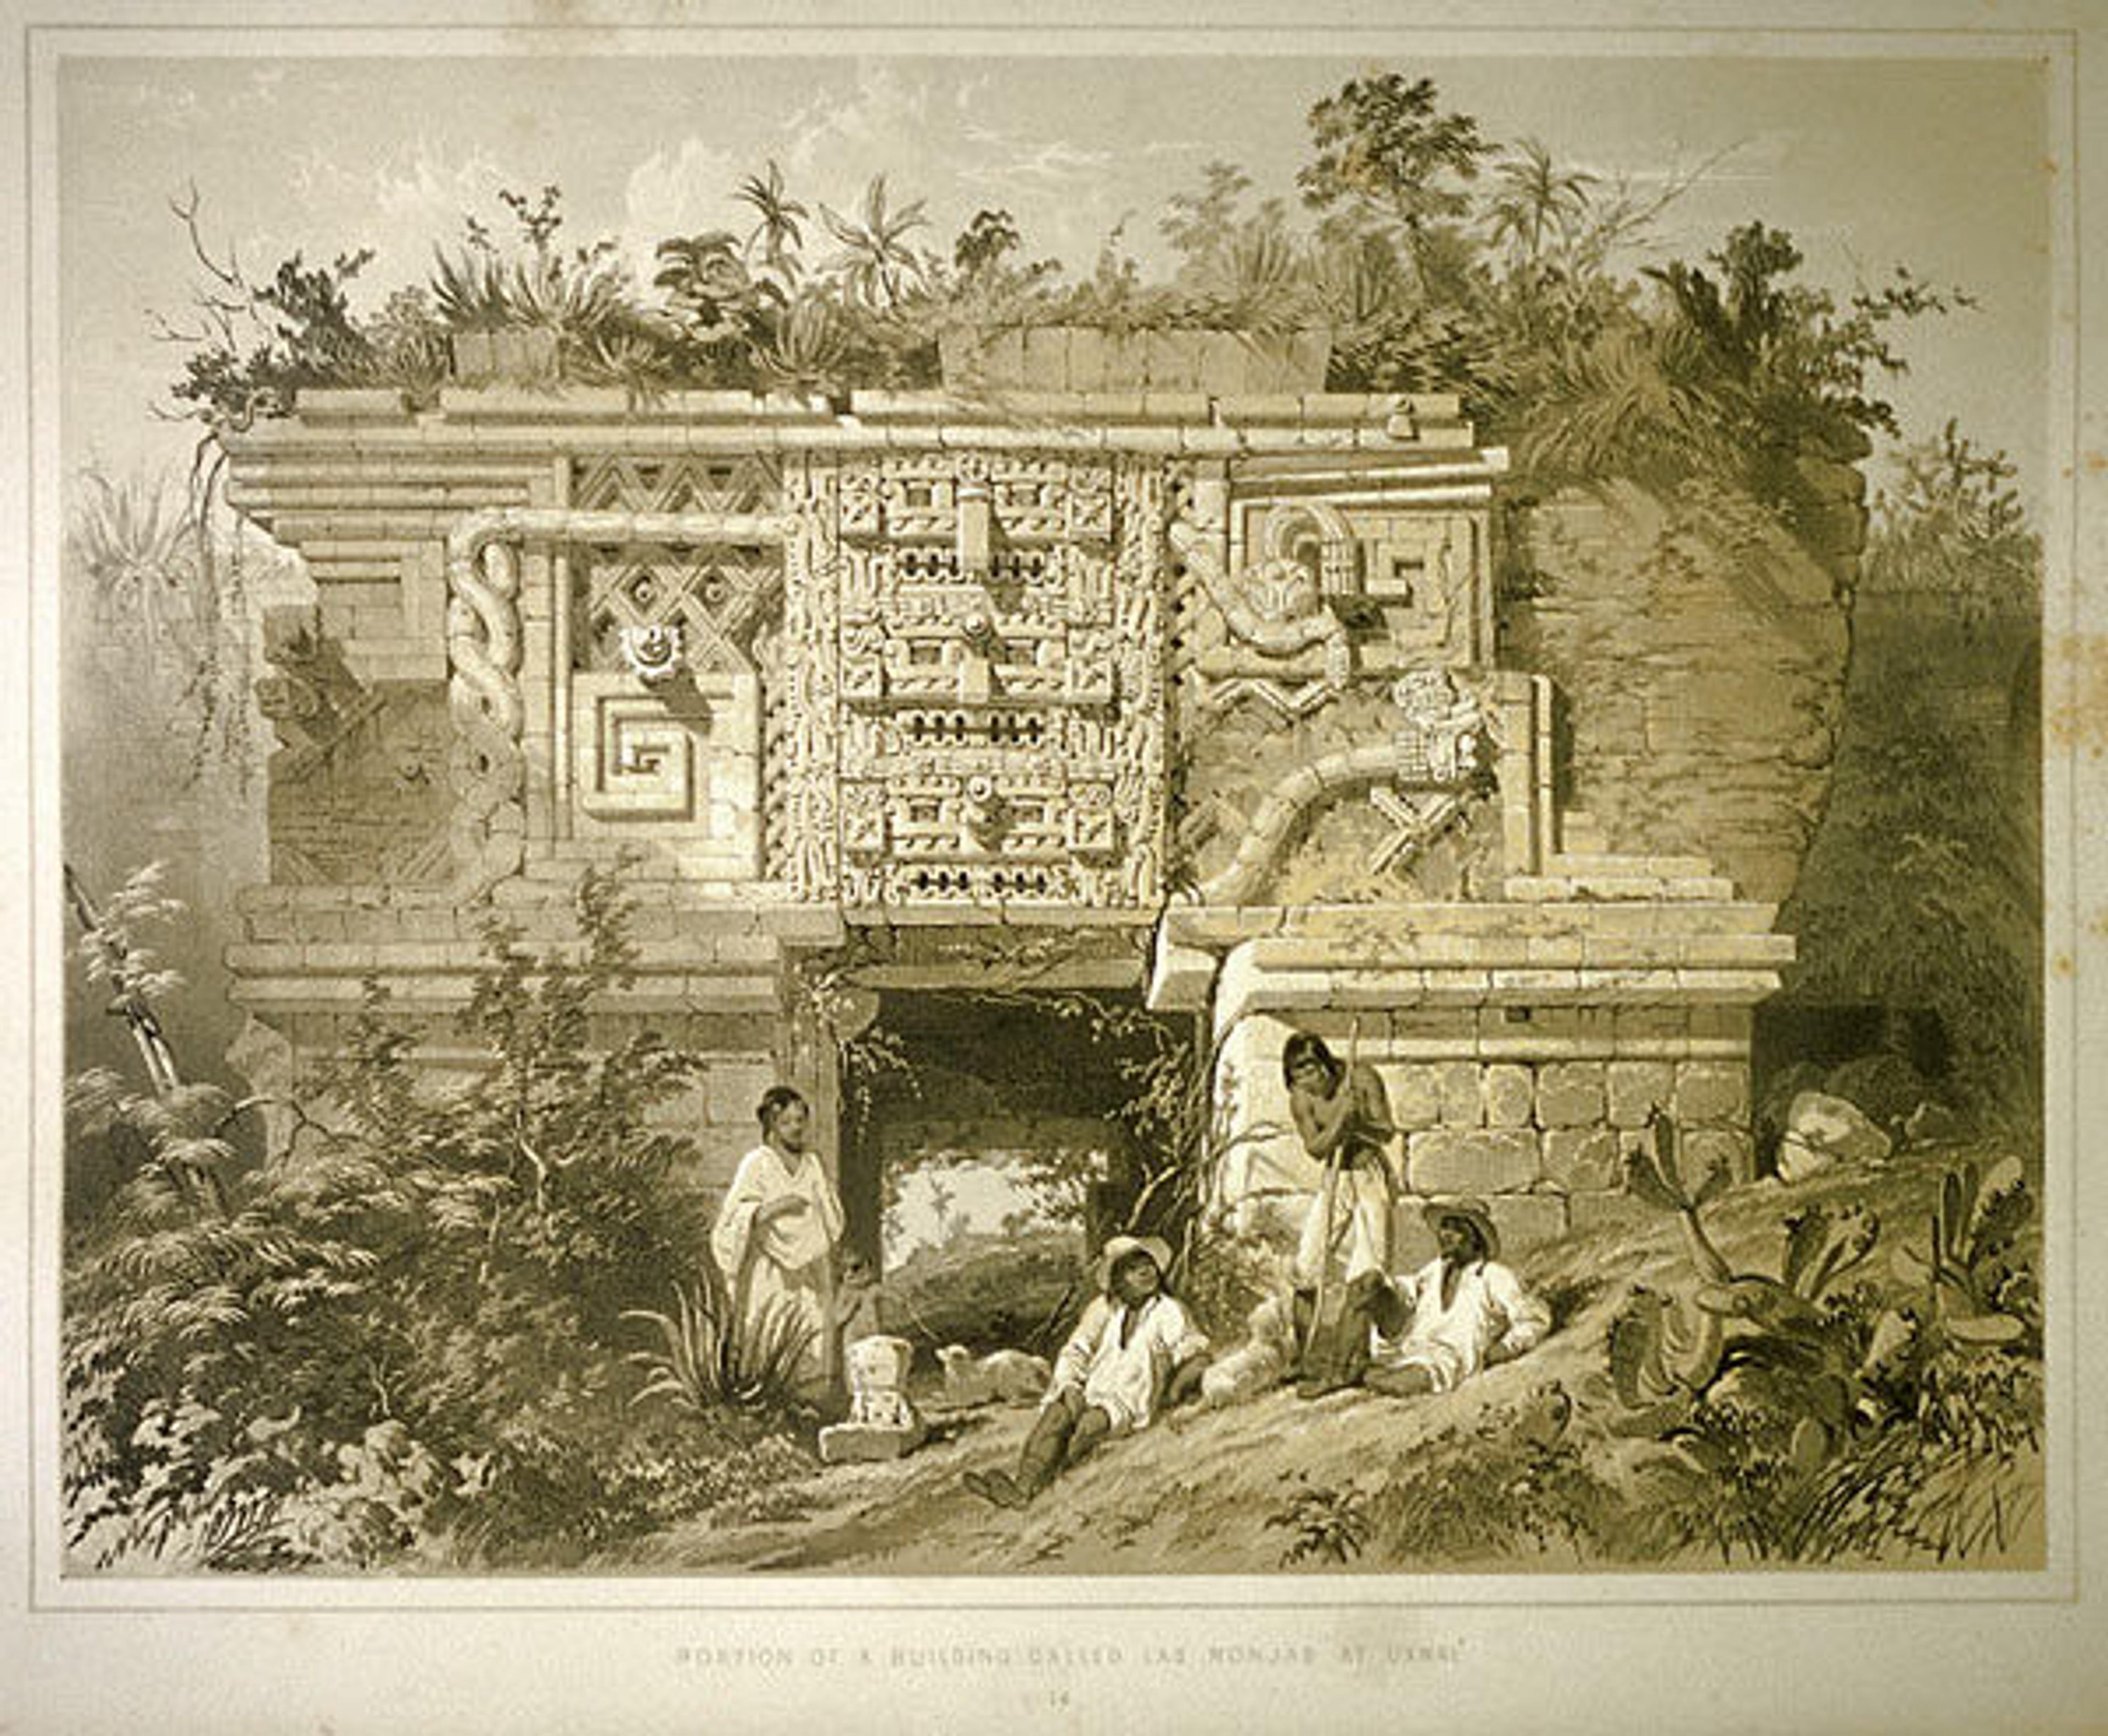 "Portion of a Building Called Las Monjas at Uxmal," by Frederick Catherwood, from Incidents of Travel in Yucatán, 1843